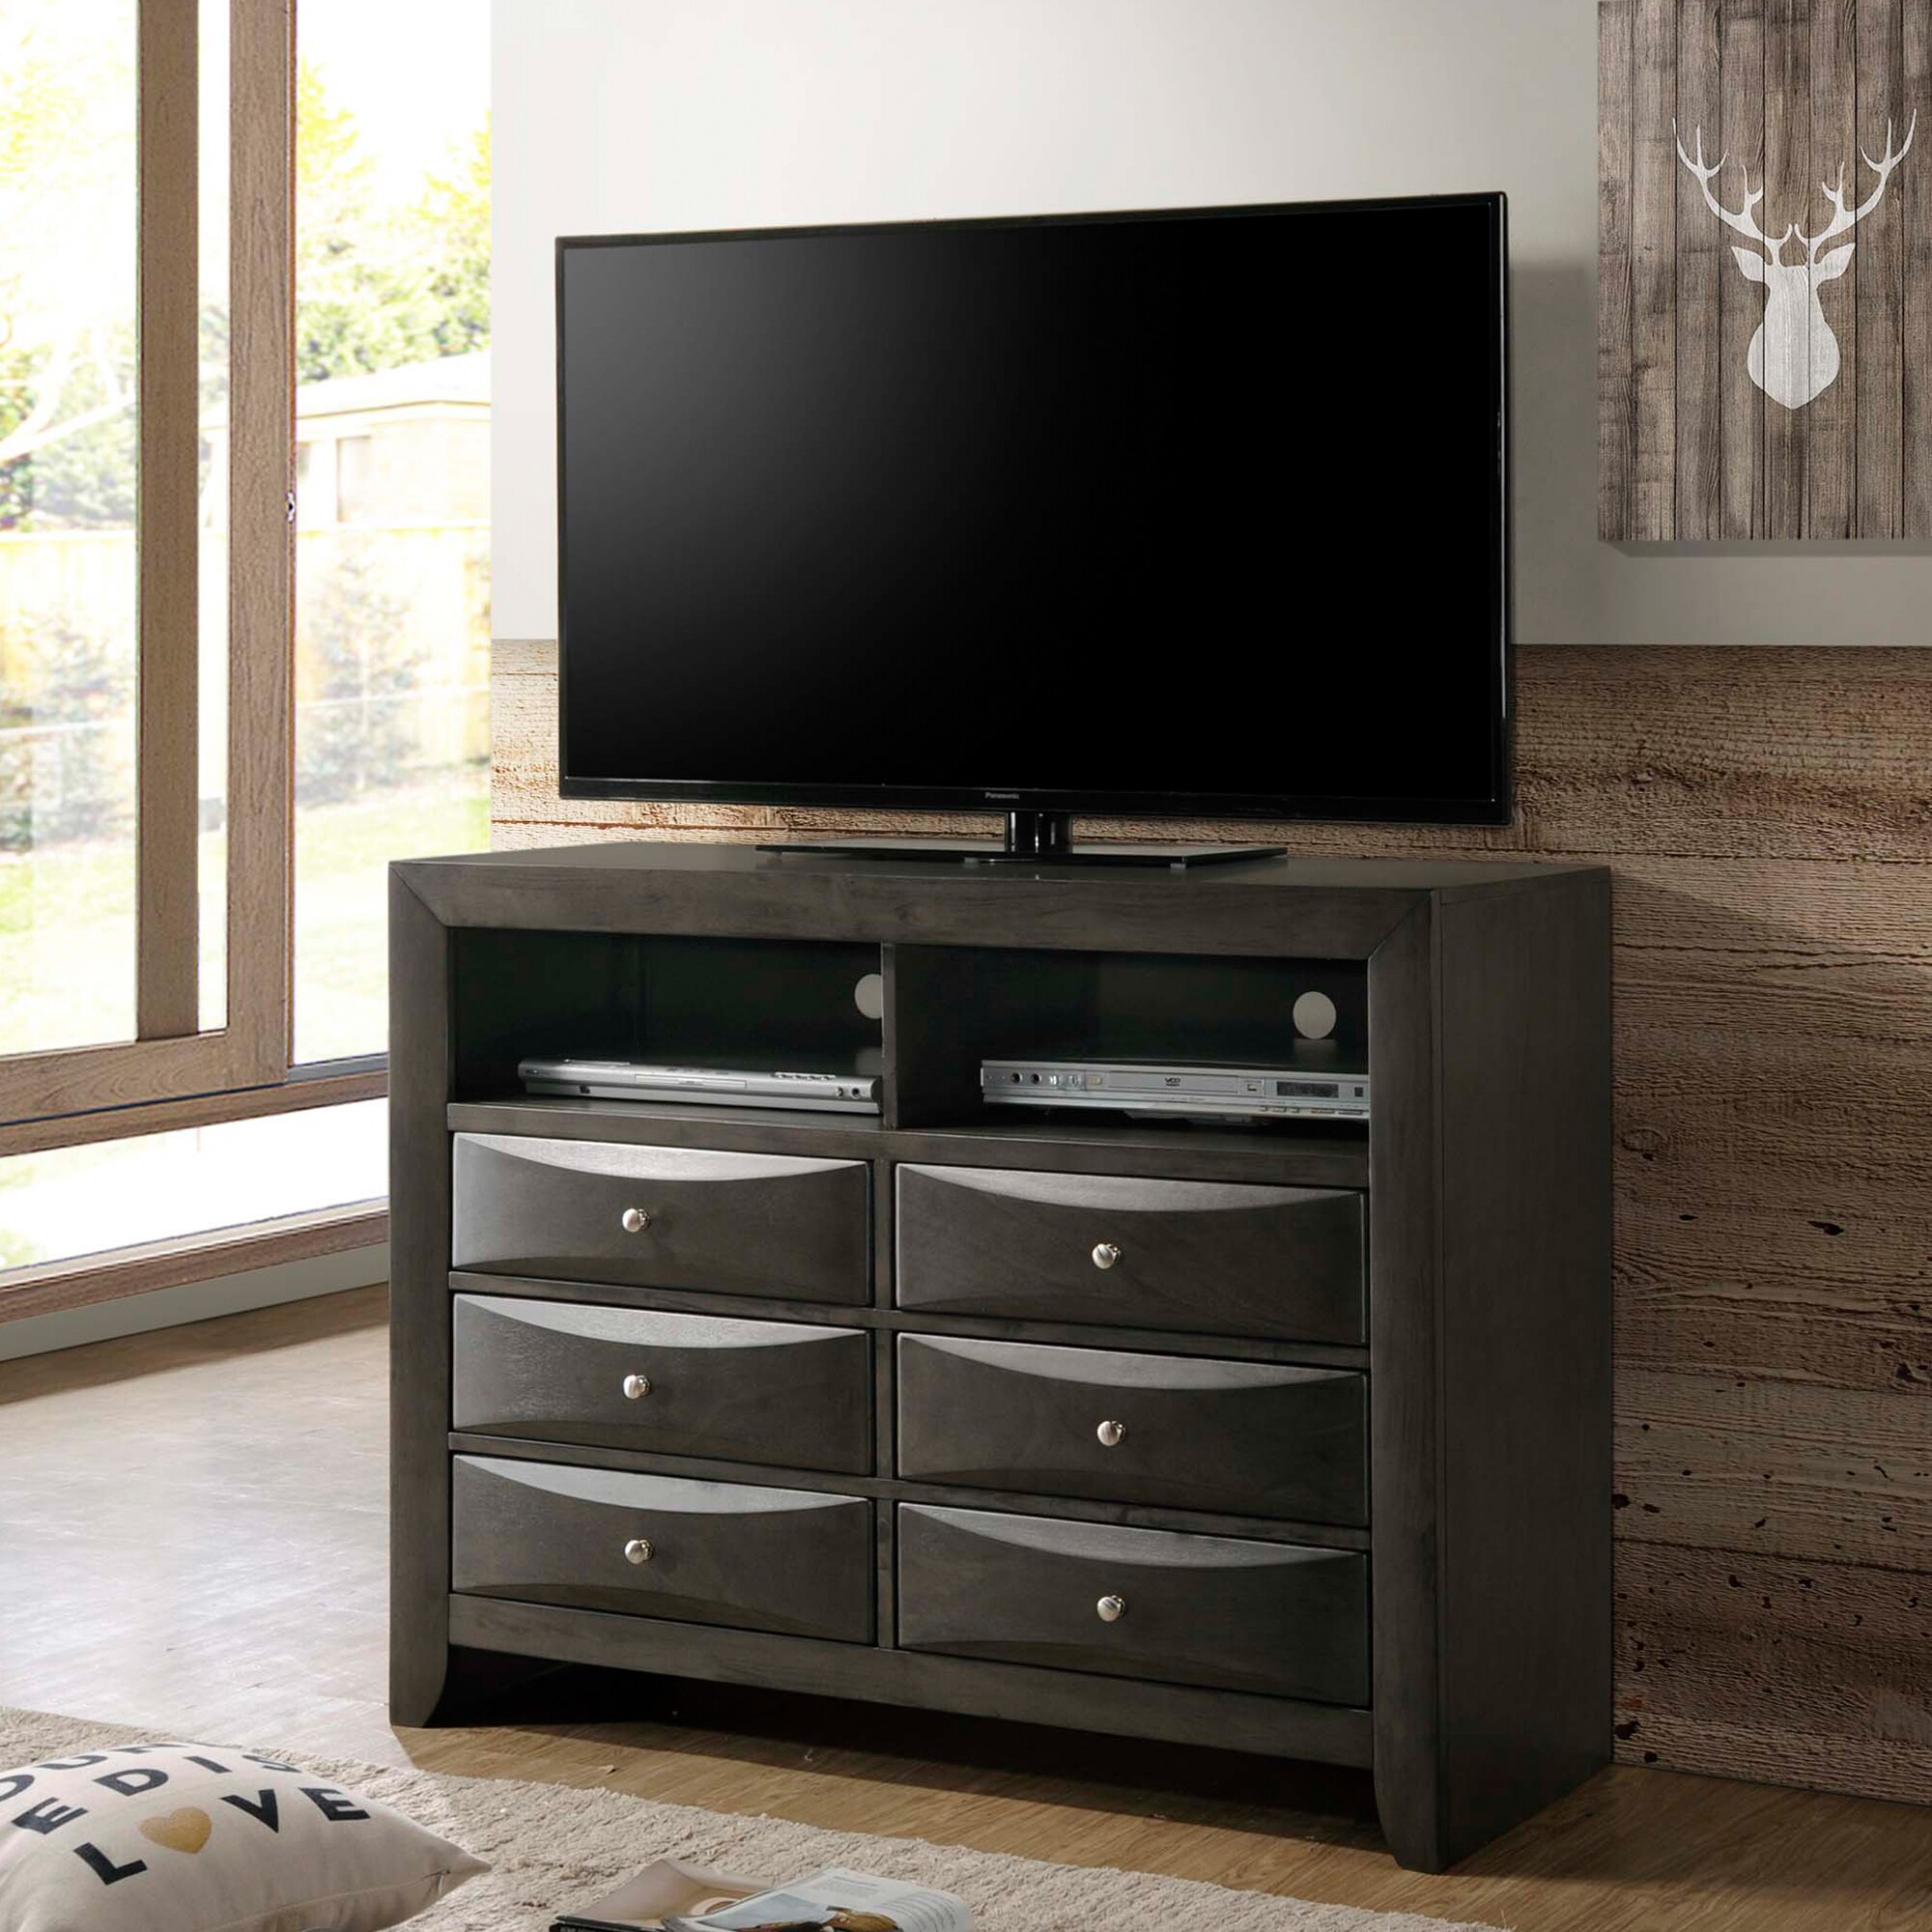 Picket House Furnishings Contemporary Gray Wood Chest With 6 Drawers And 2 Media Compartments